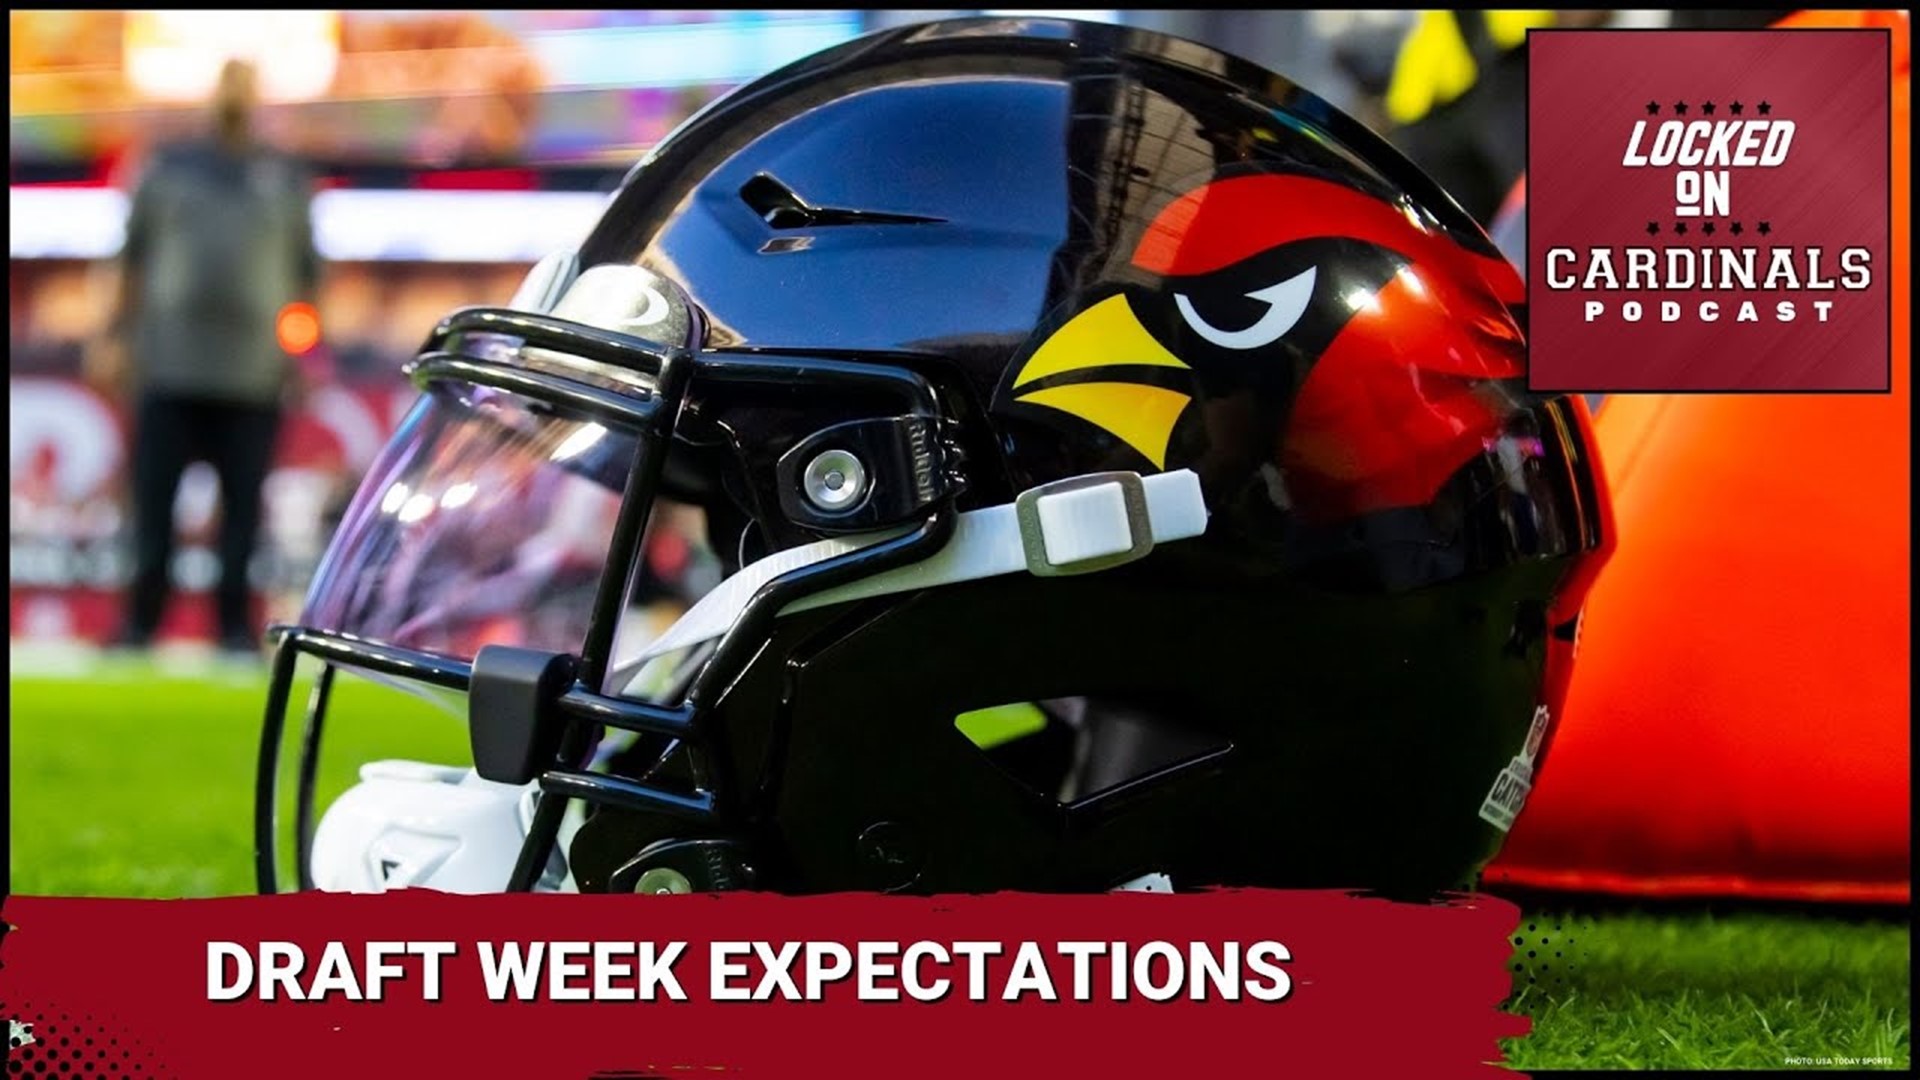 Arizona Cardinals are on the precipice of participating in potentially the most important draft in the history of the organization.